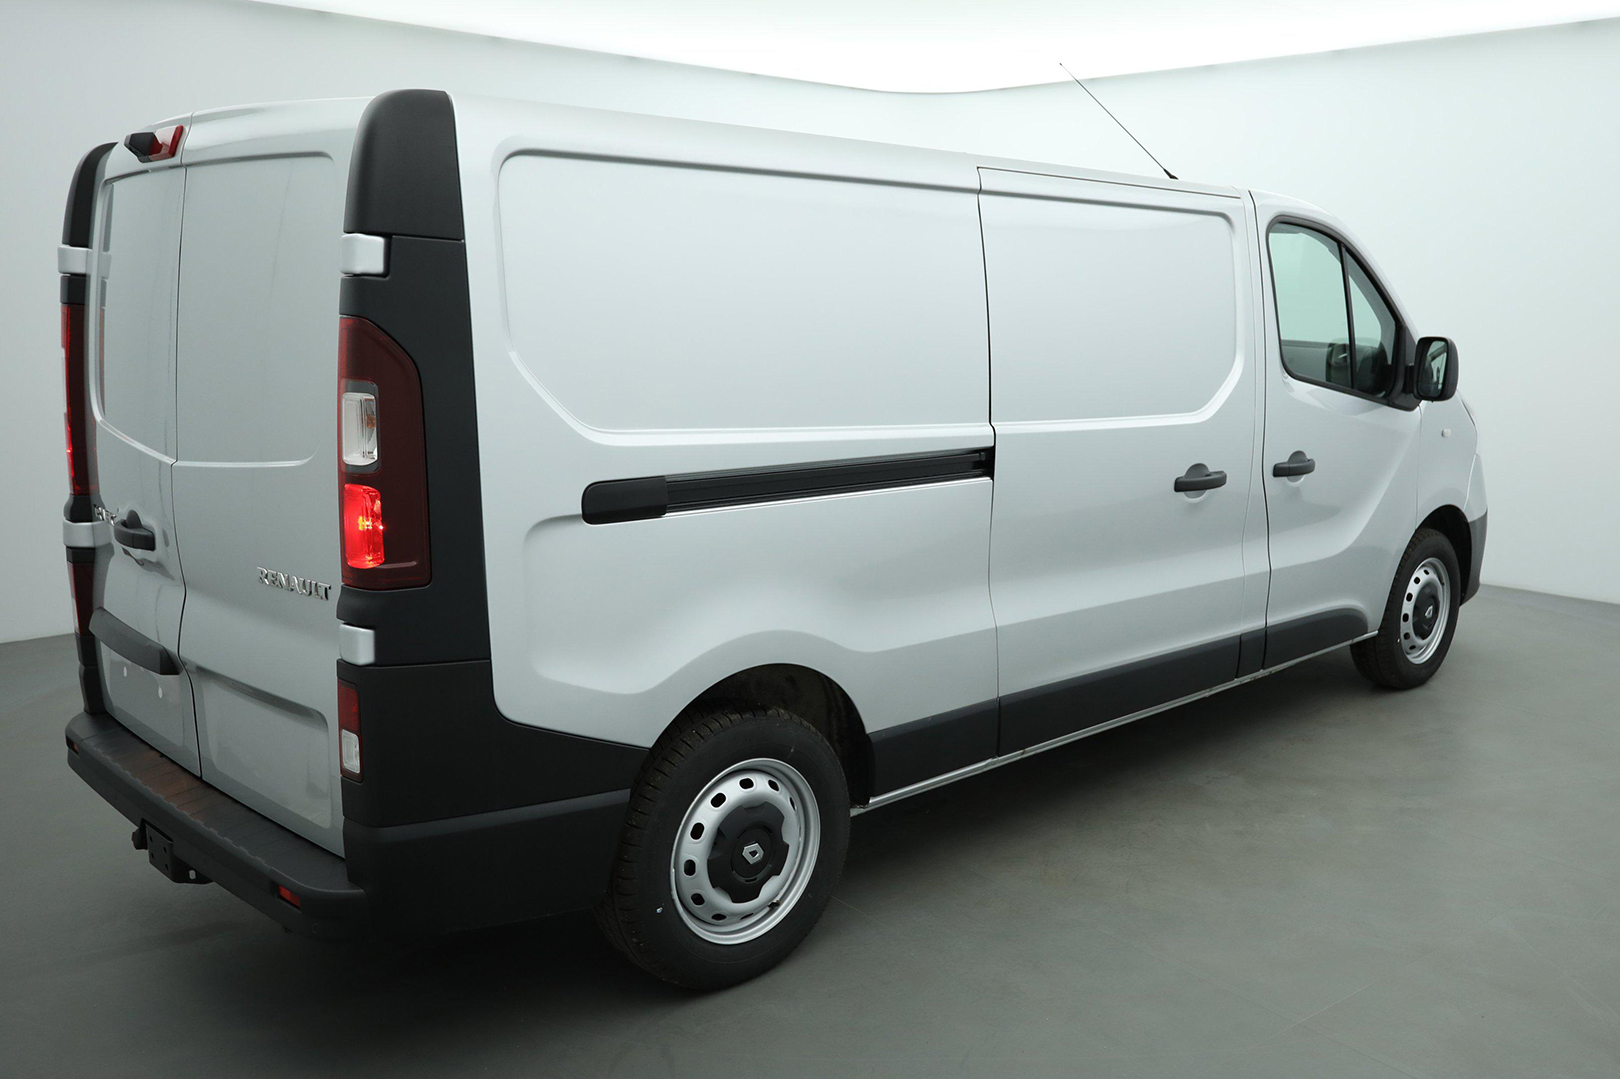 Guide achat Renault Trafic fourgon - Quel Renault Trafic choisir